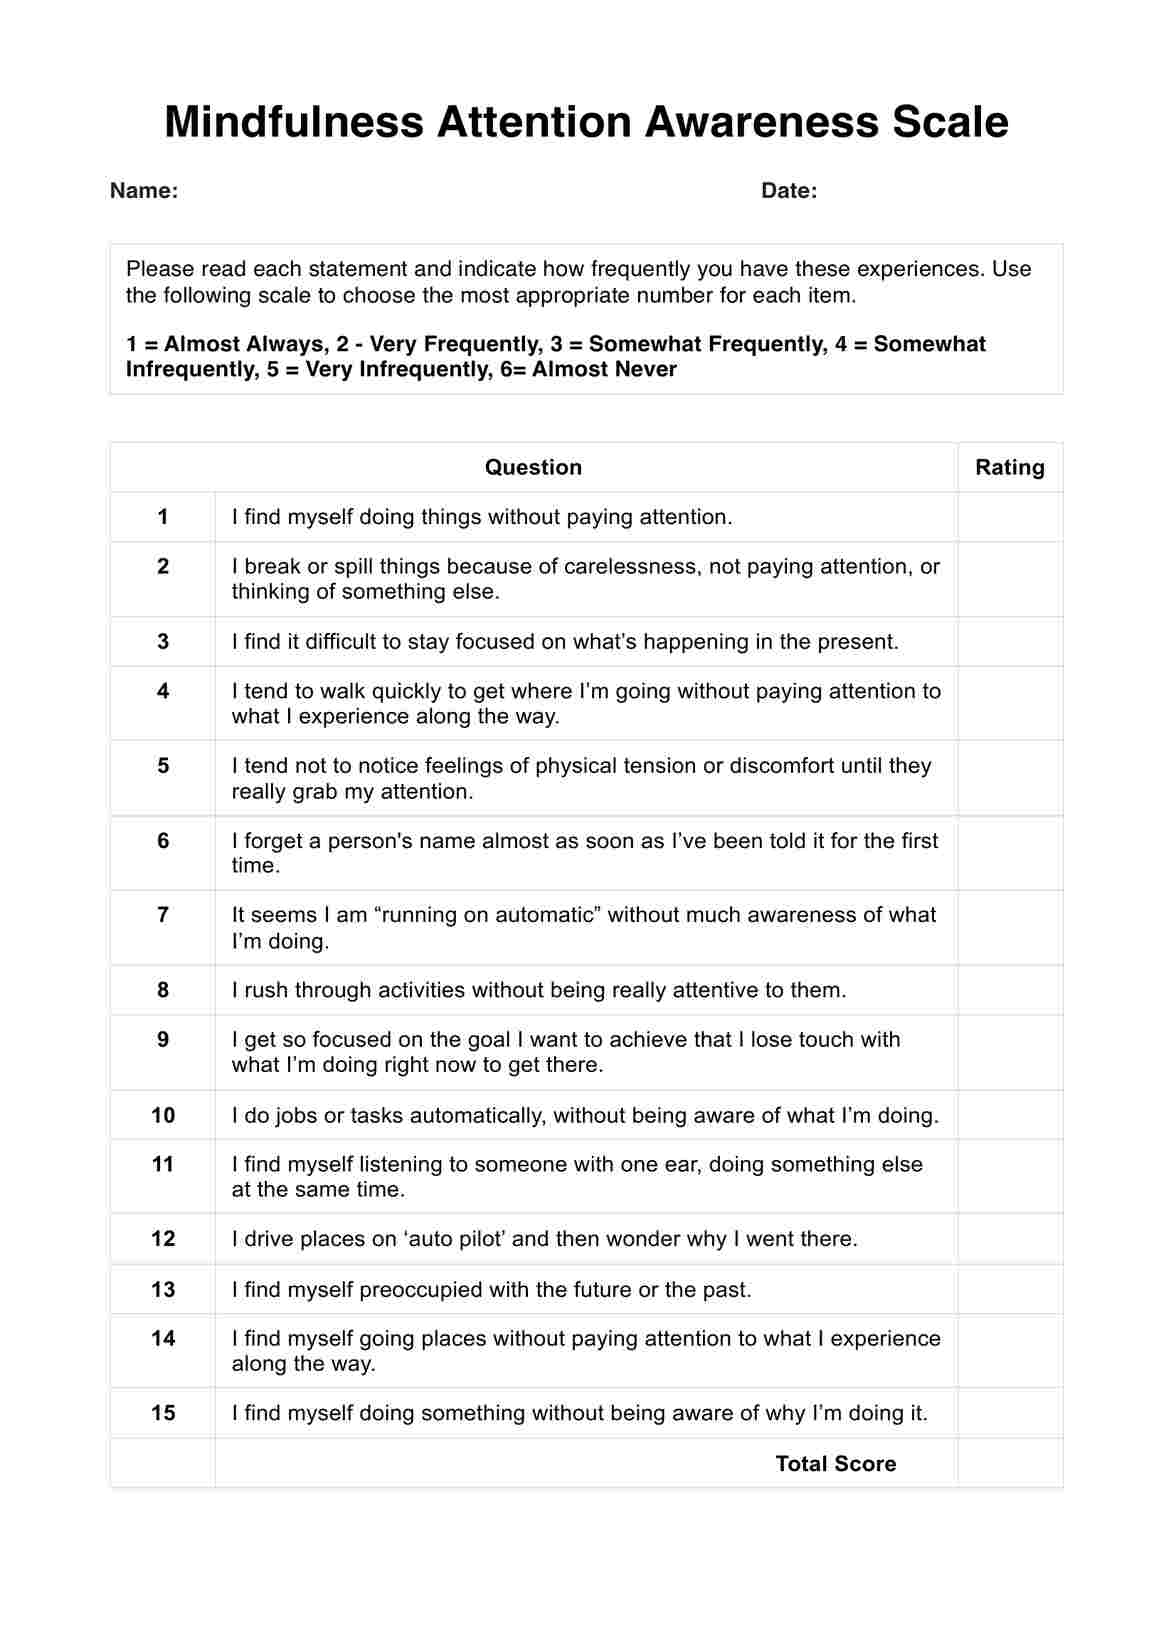 Mindfulness Attention Awareness Scale PDF Example